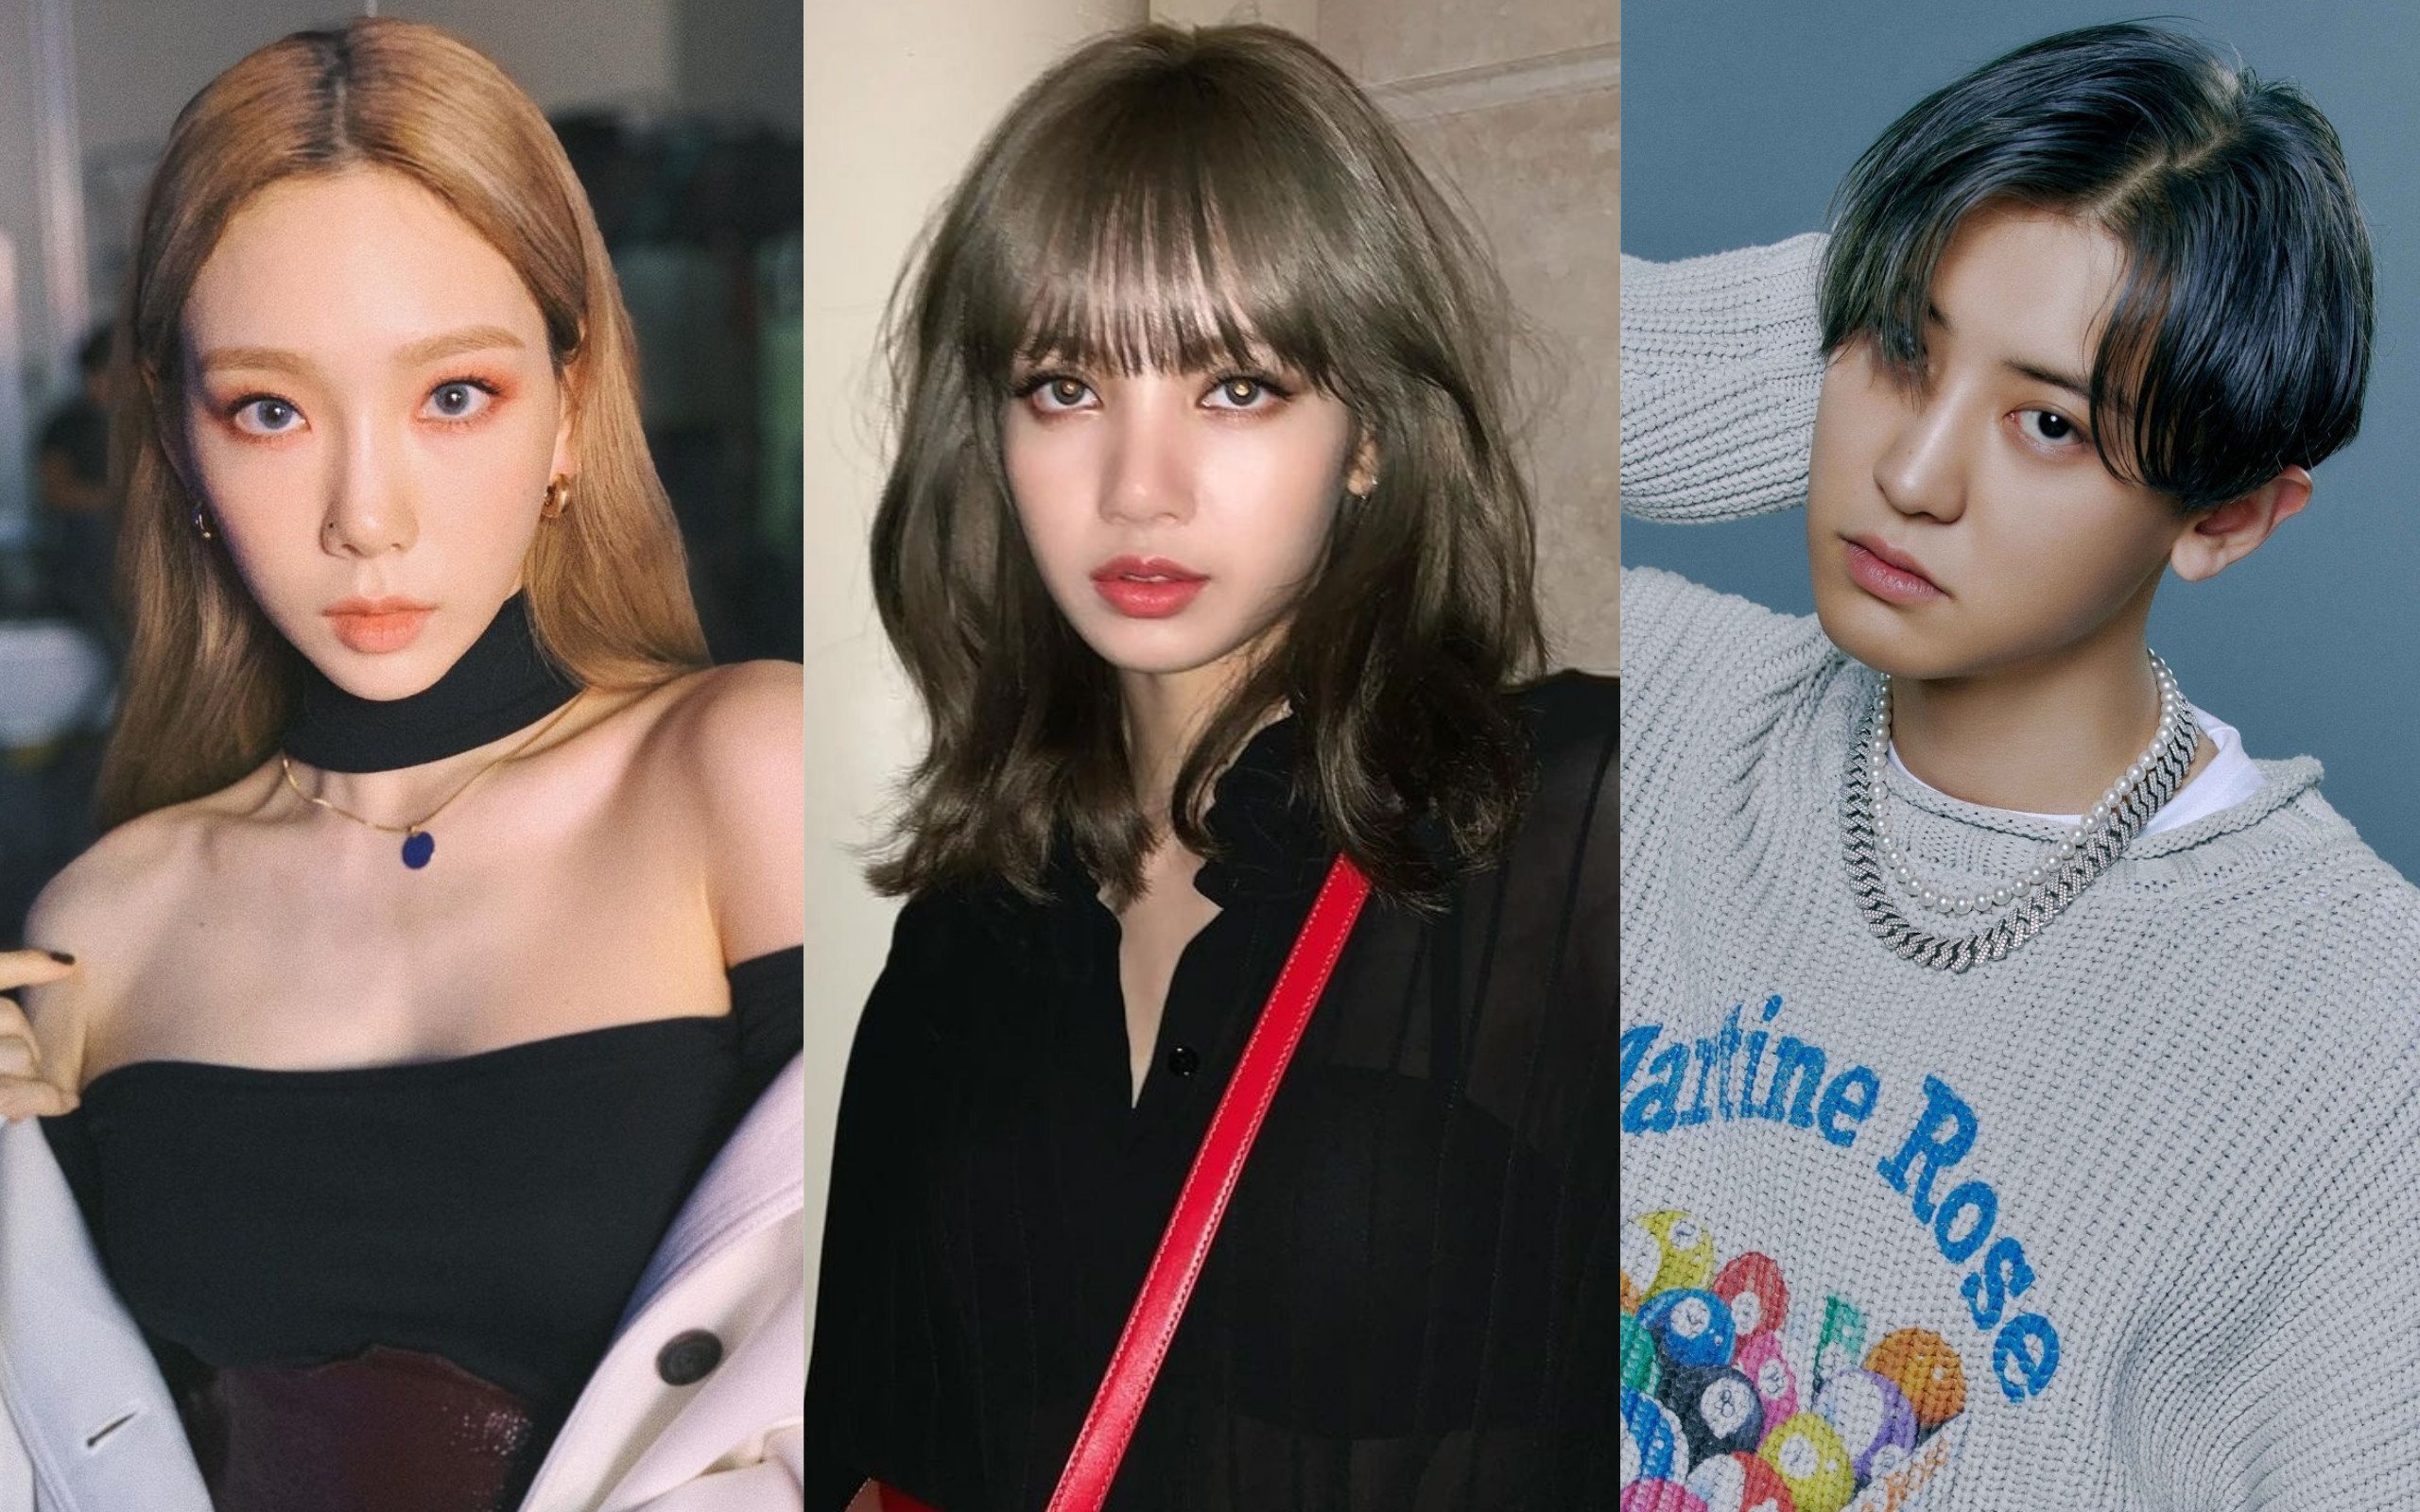 Taeyeon from SNSD, Lisa from Blackpink and Chanyeol from Exo. Photos: @taeyeon_ss; @lalalalisa_m/Instagram, @CHANYEOLxNA/Twitter